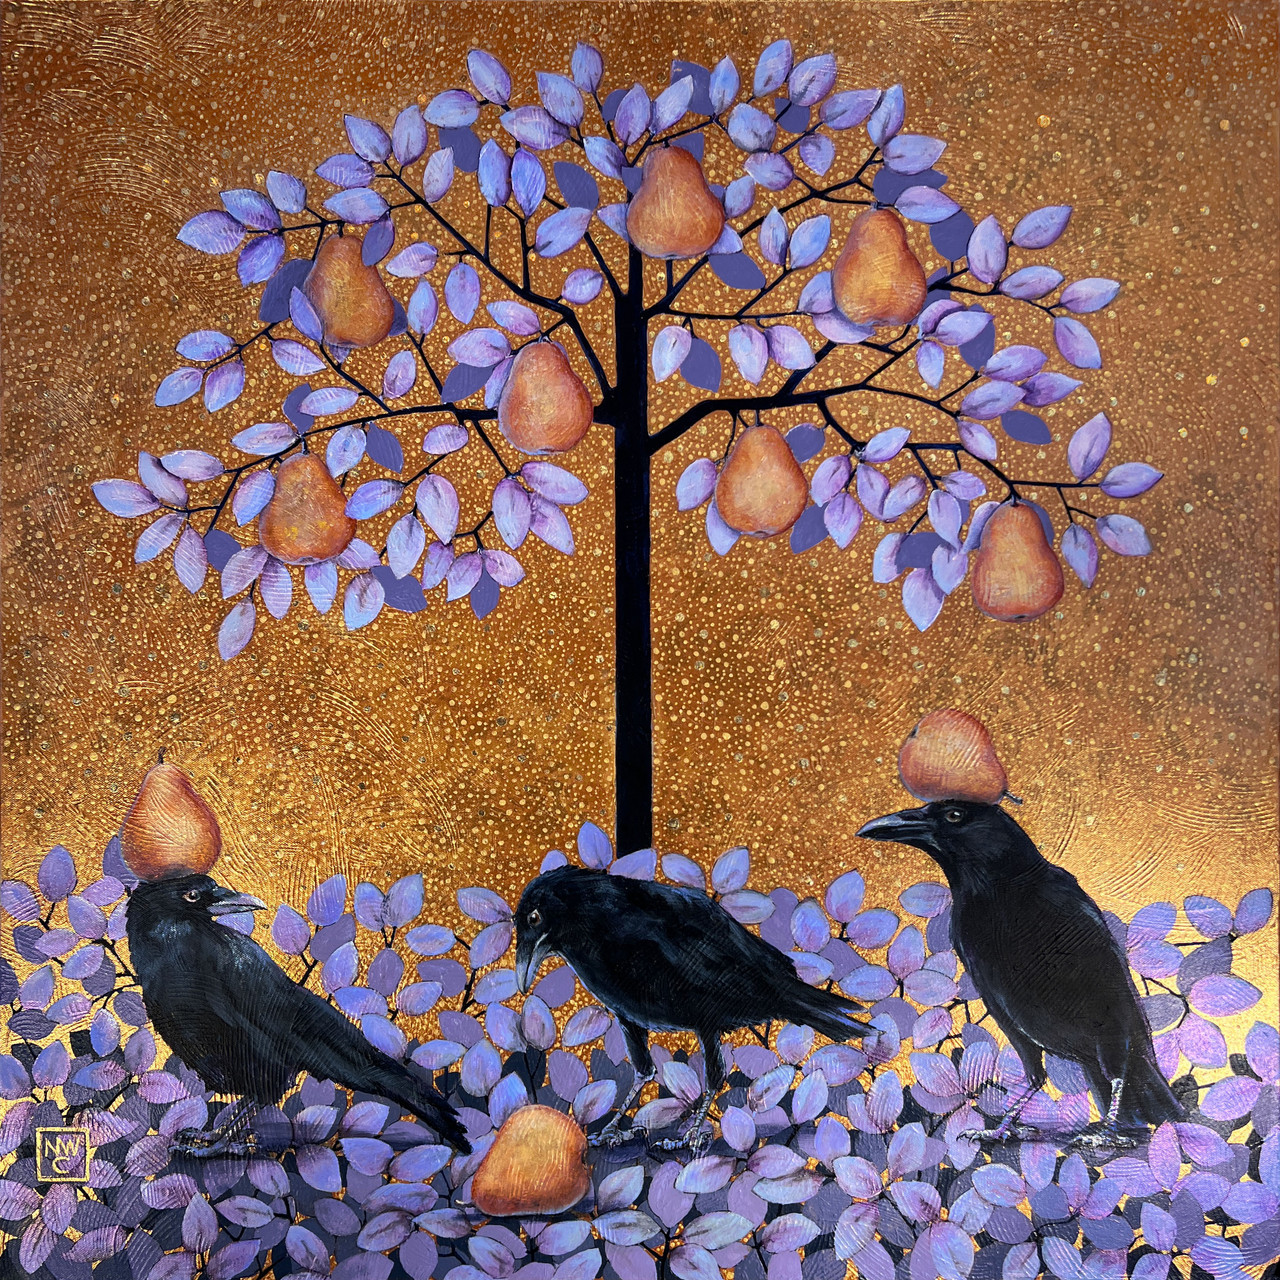 Painting with a speckled gold background, with a black tree with purple leaves and pears in the center. On the ground are more leaves and three crows each with a pear.